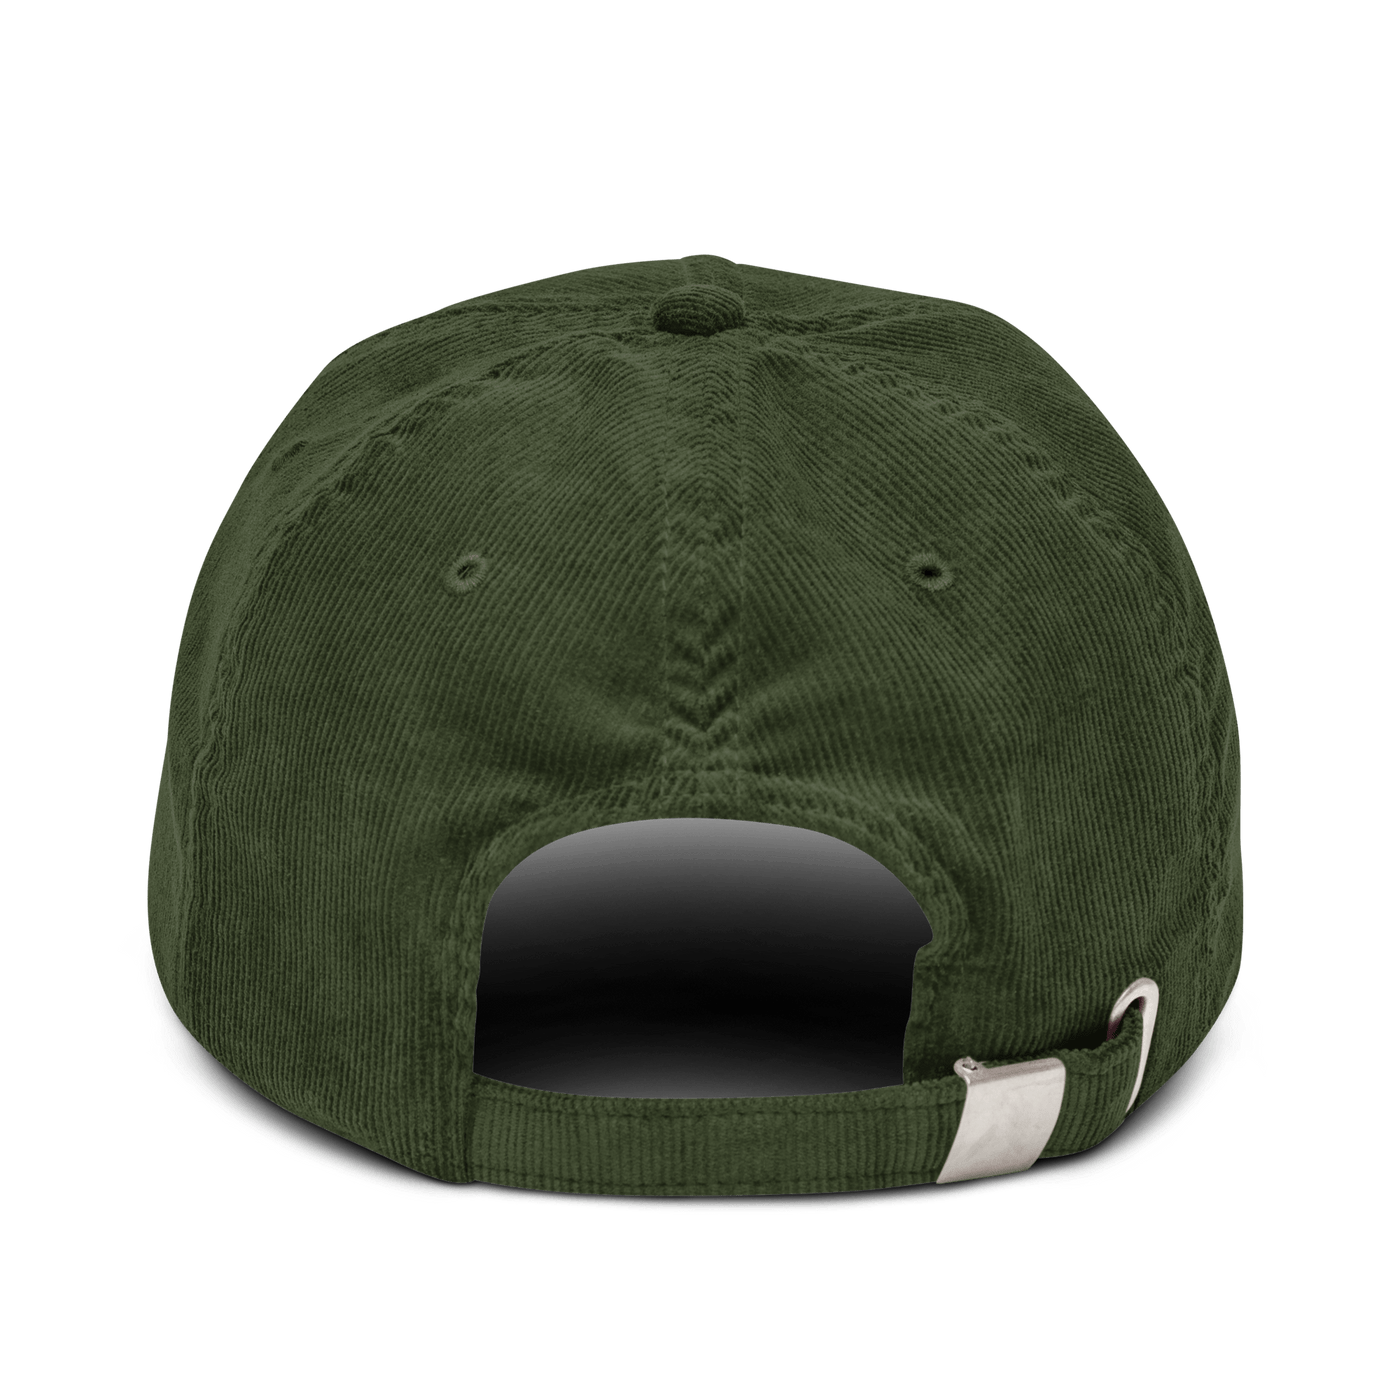 Dogs before Dudes Corduroy hat - Dark Olive - - Just Another Cap Store